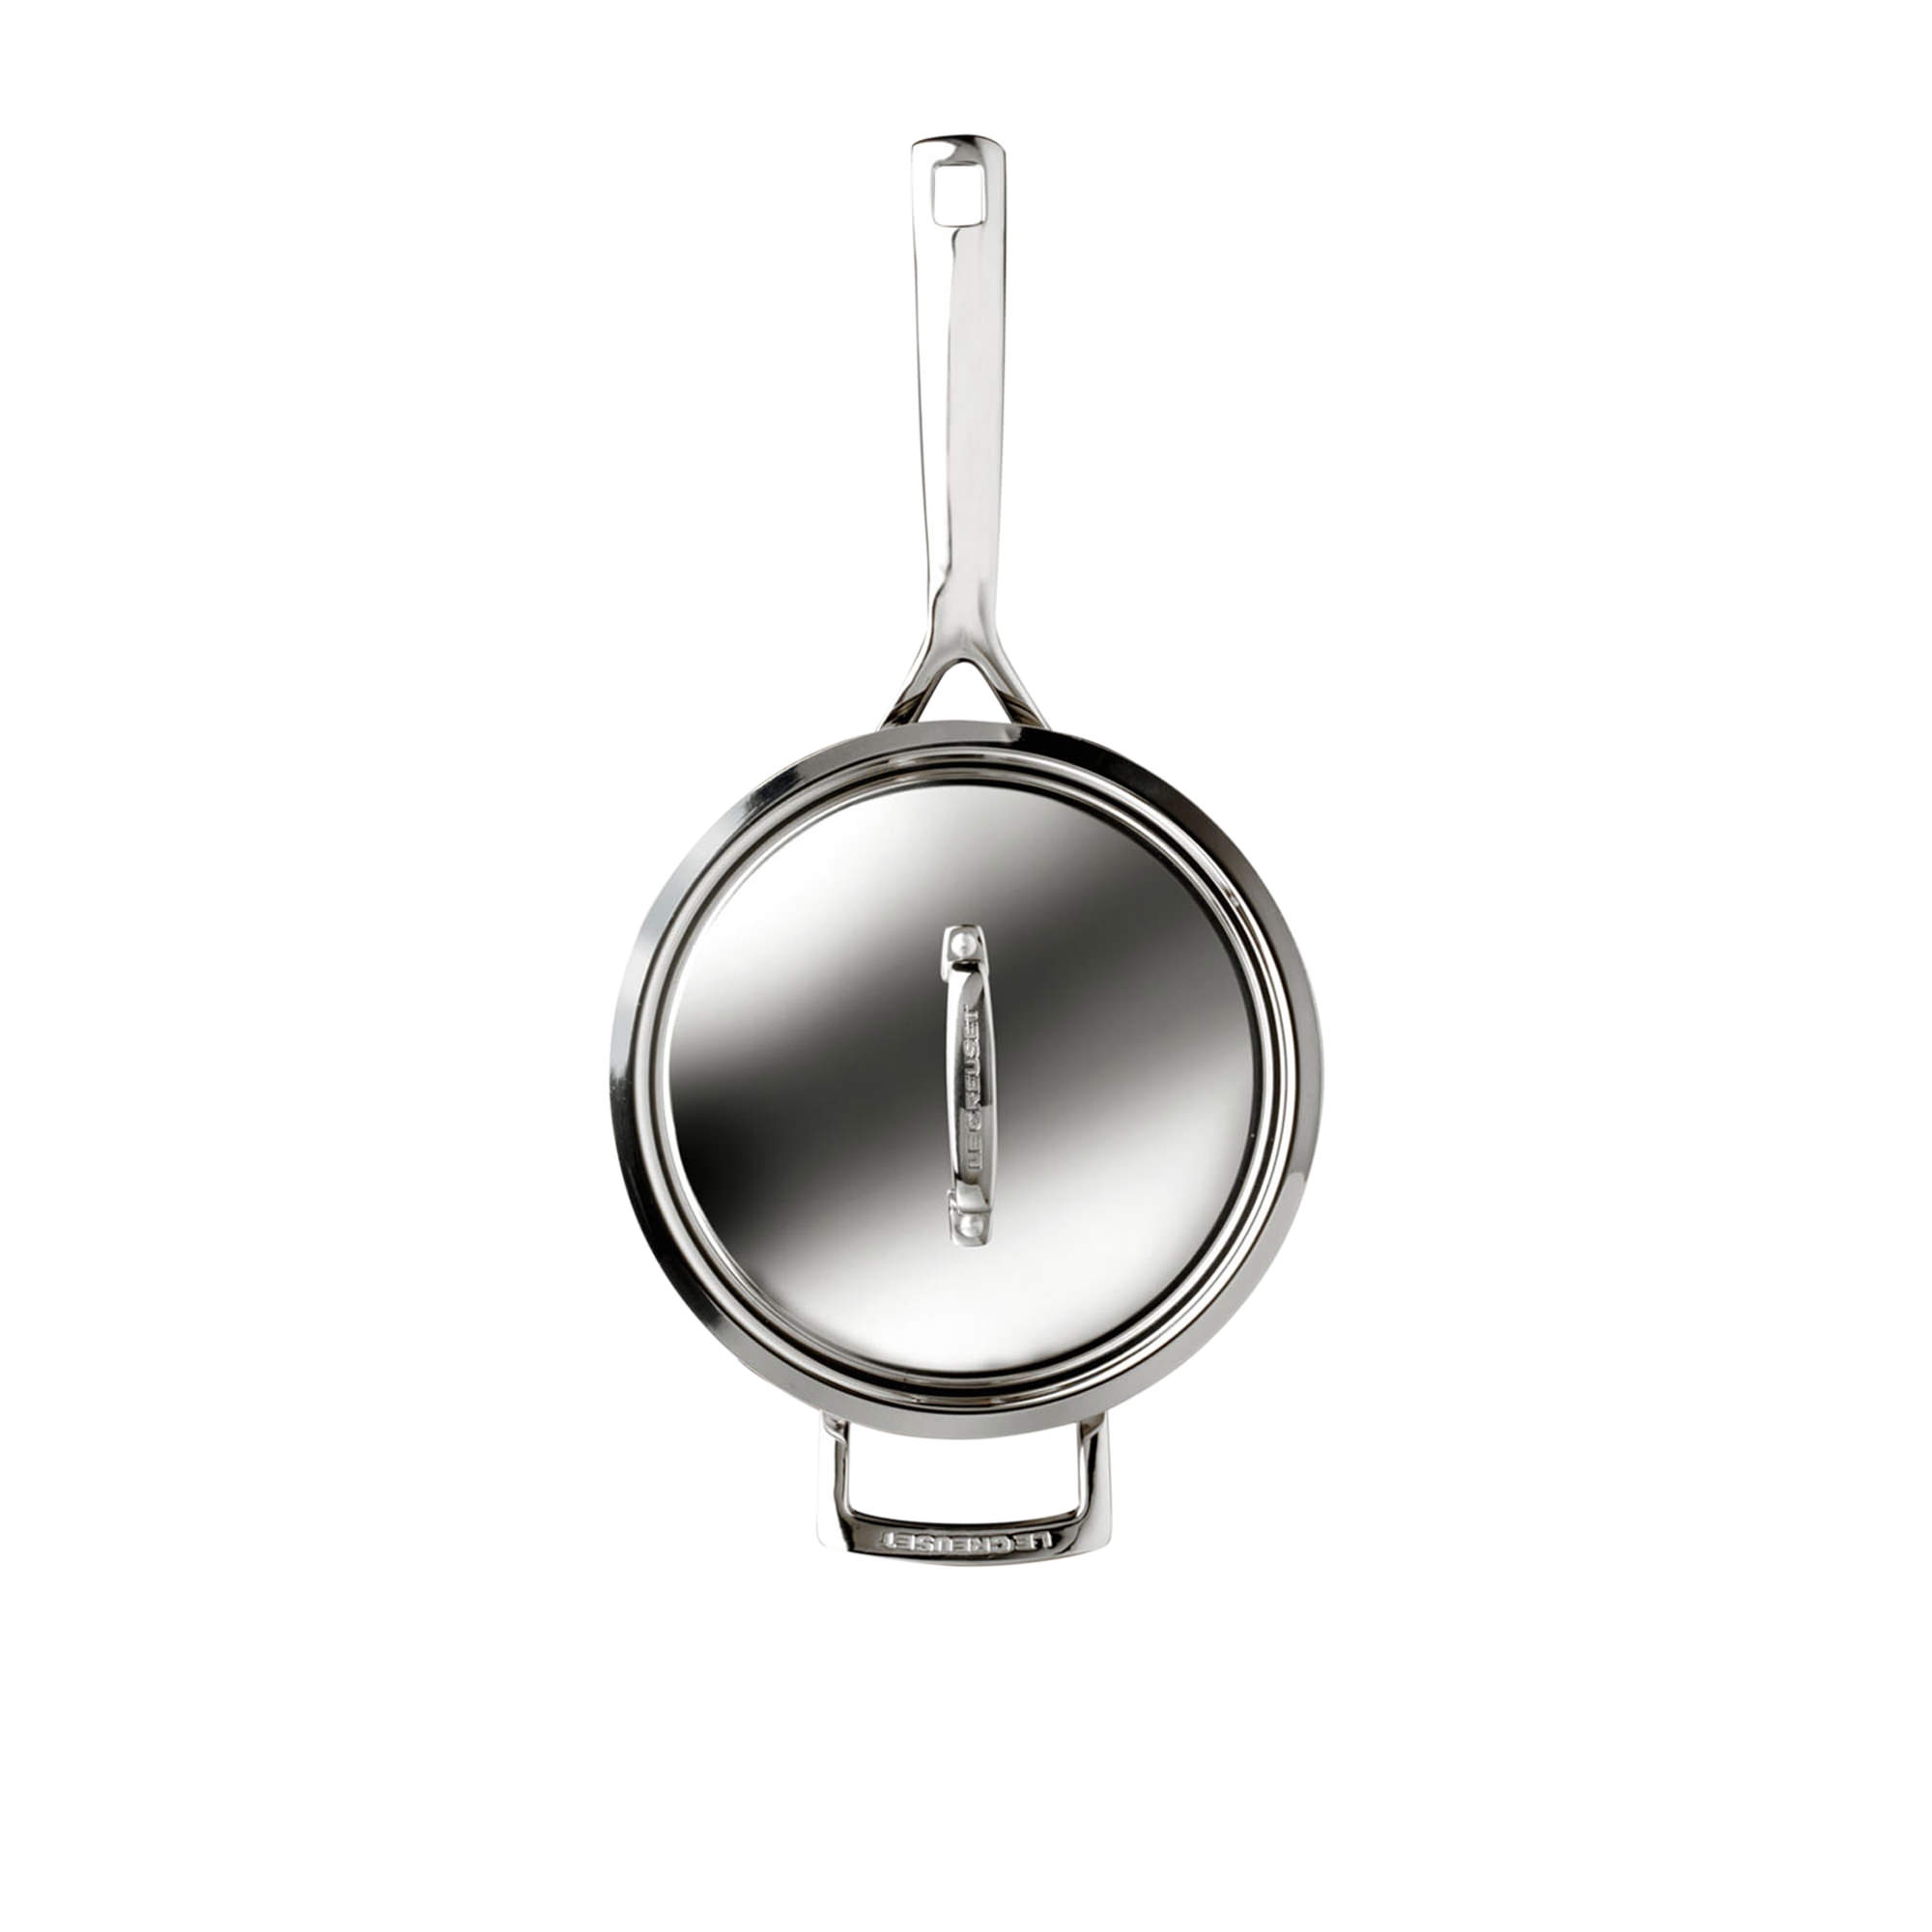 Le Creuset 3-Ply Stainless Steel Saucepan with Lid 20cm - 3.8L Image 2